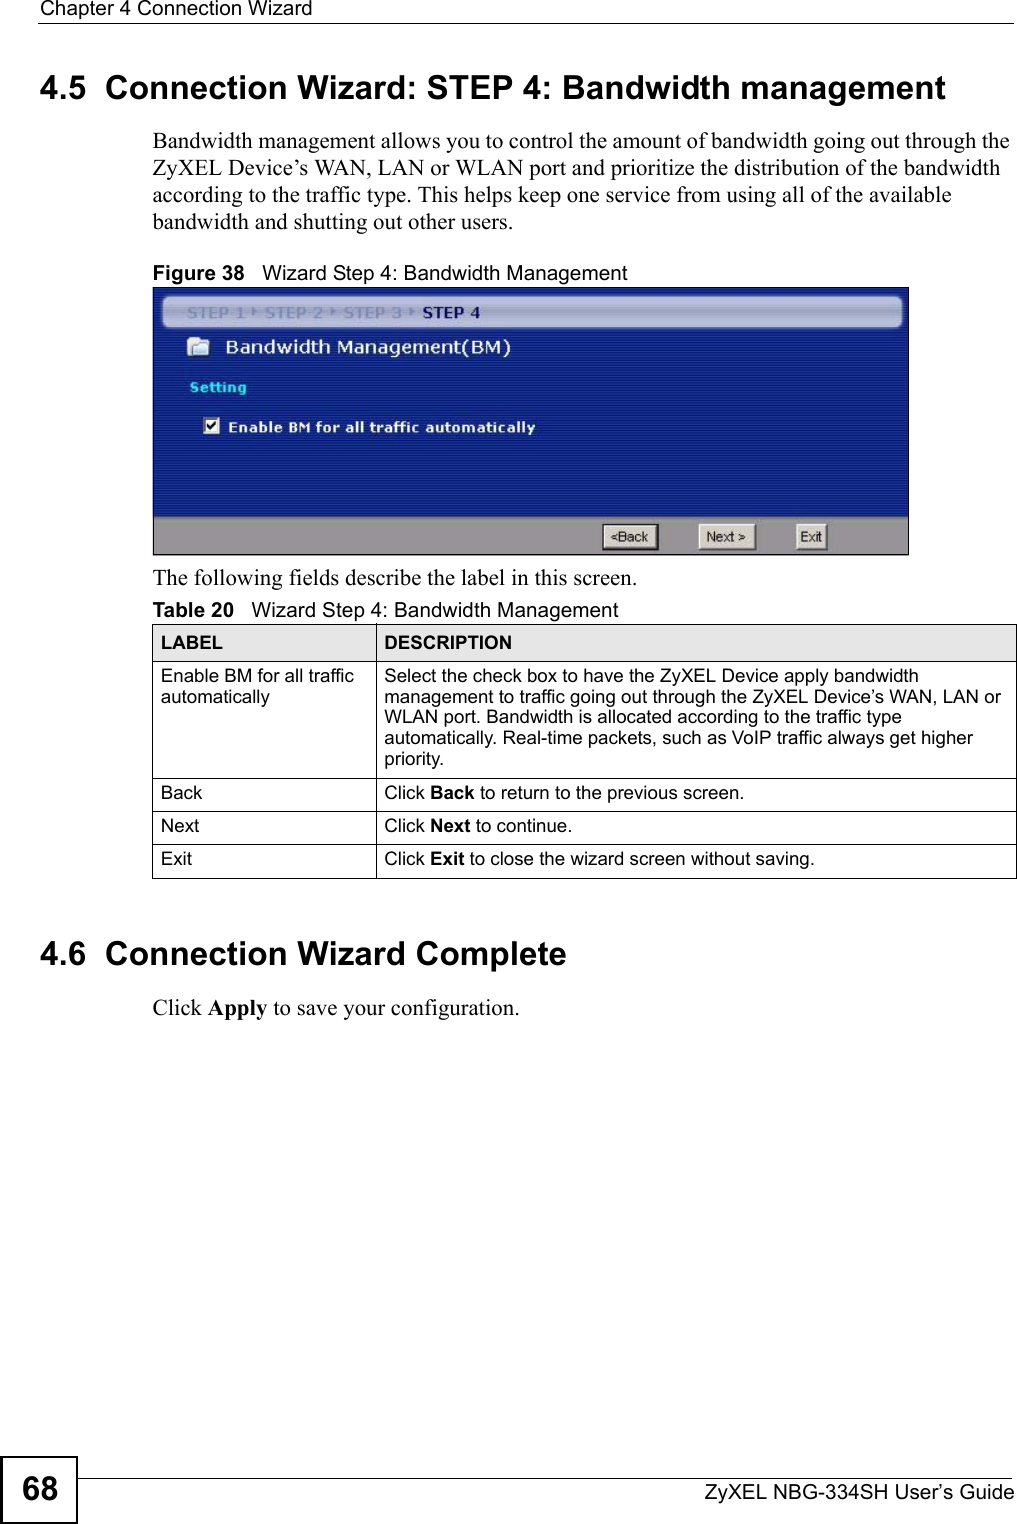 Chapter 4 Connection WizardZyXEL NBG-334SH User’s Guide684.5  Connection Wizard: STEP 4: Bandwidth managementBandwidth management allows you to control the amount of bandwidth going out through the ZyXEL Device’s WAN, LAN or WLAN port and prioritize the distribution of the bandwidth according to the traffic type. This helps keep one service from using all of the available bandwidth and shutting out other users.Figure 38   Wizard Step 4: Bandwidth Management The following fields describe the label in this screen.4.6  Connection Wizard CompleteClick Apply to save your configuration.Table 20   Wizard Step 4: Bandwidth ManagementLABEL DESCRIPTIONEnable BM for all traffic automaticallySelect the check box to have the ZyXEL Device apply bandwidth management to traffic going out through the ZyXEL Device’s WAN, LAN or WLAN port. Bandwidth is allocated according to the traffic type automatically. Real-time packets, such as VoIP traffic always get higher priority.Back Click Back to return to the previous screen.Next Click Next to continue. Exit Click Exit to close the wizard screen without saving.